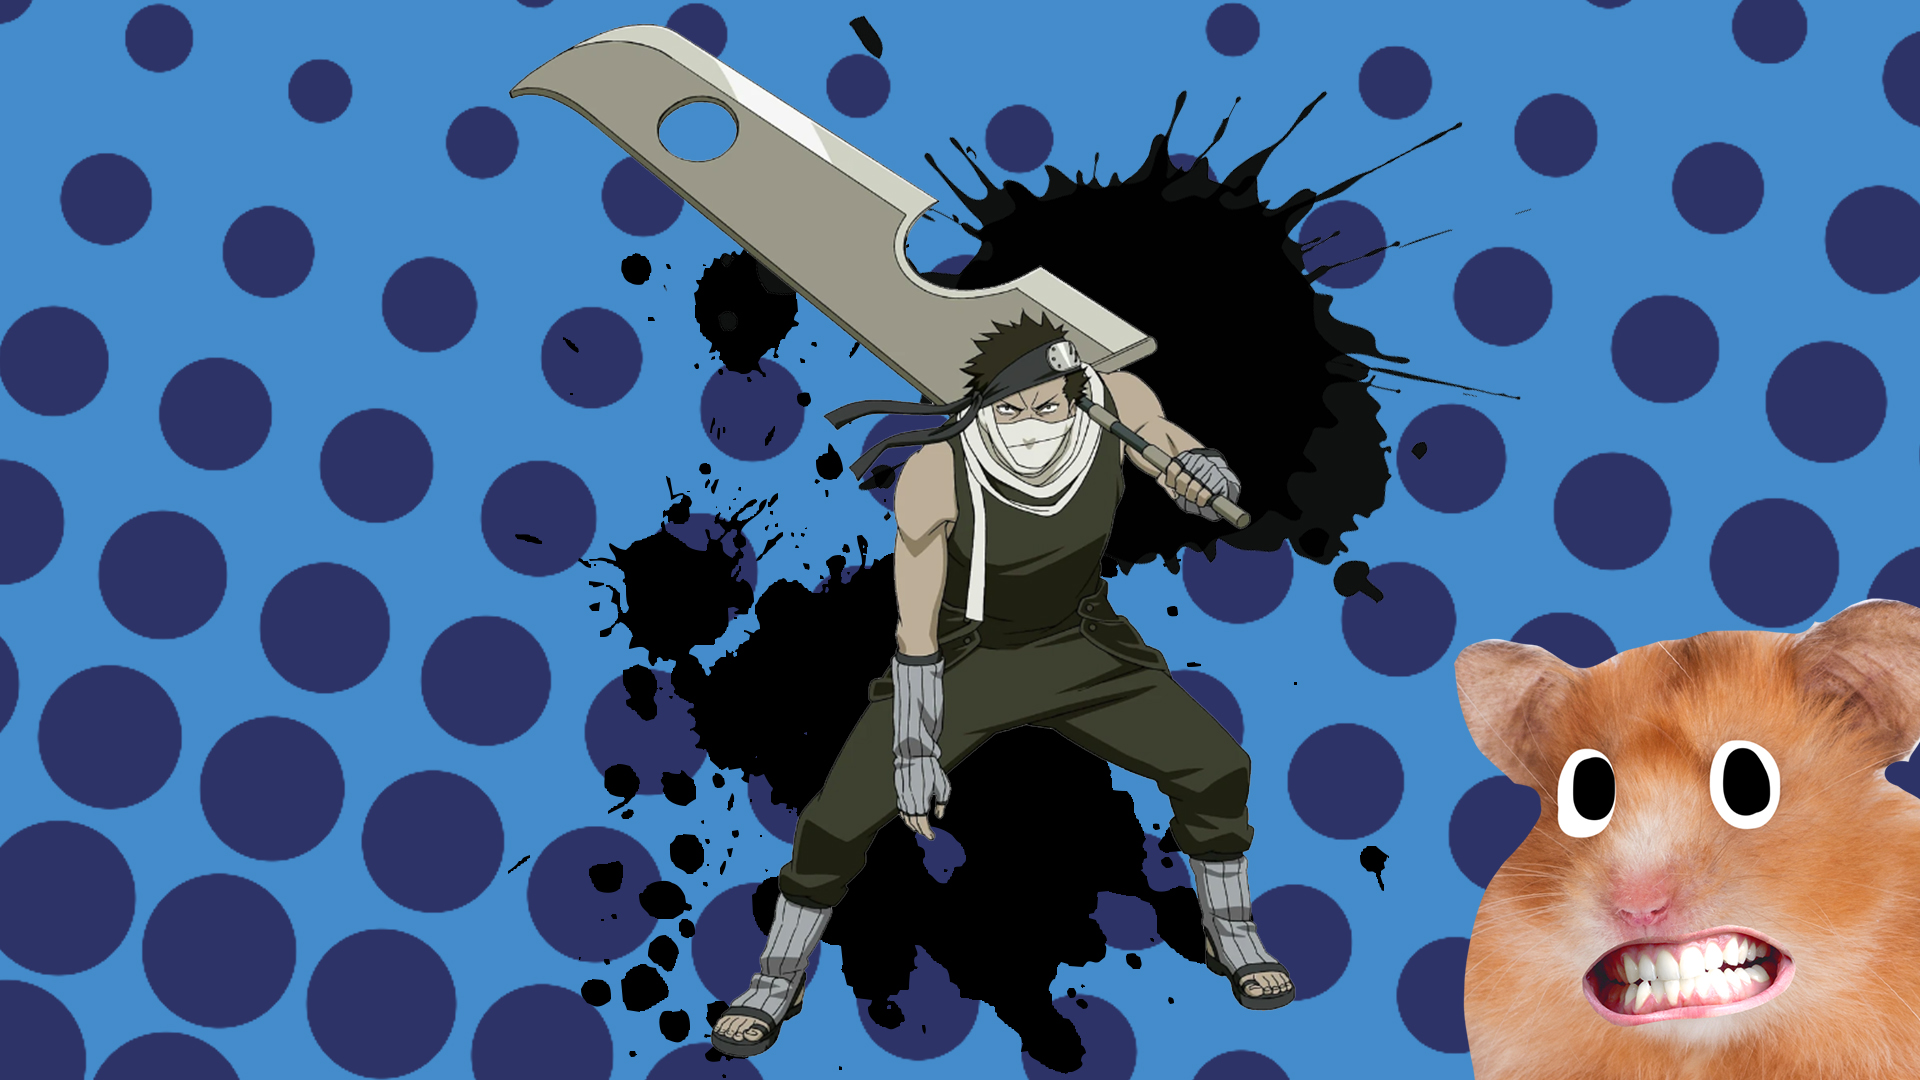 A Naruto character stands and looks very cool